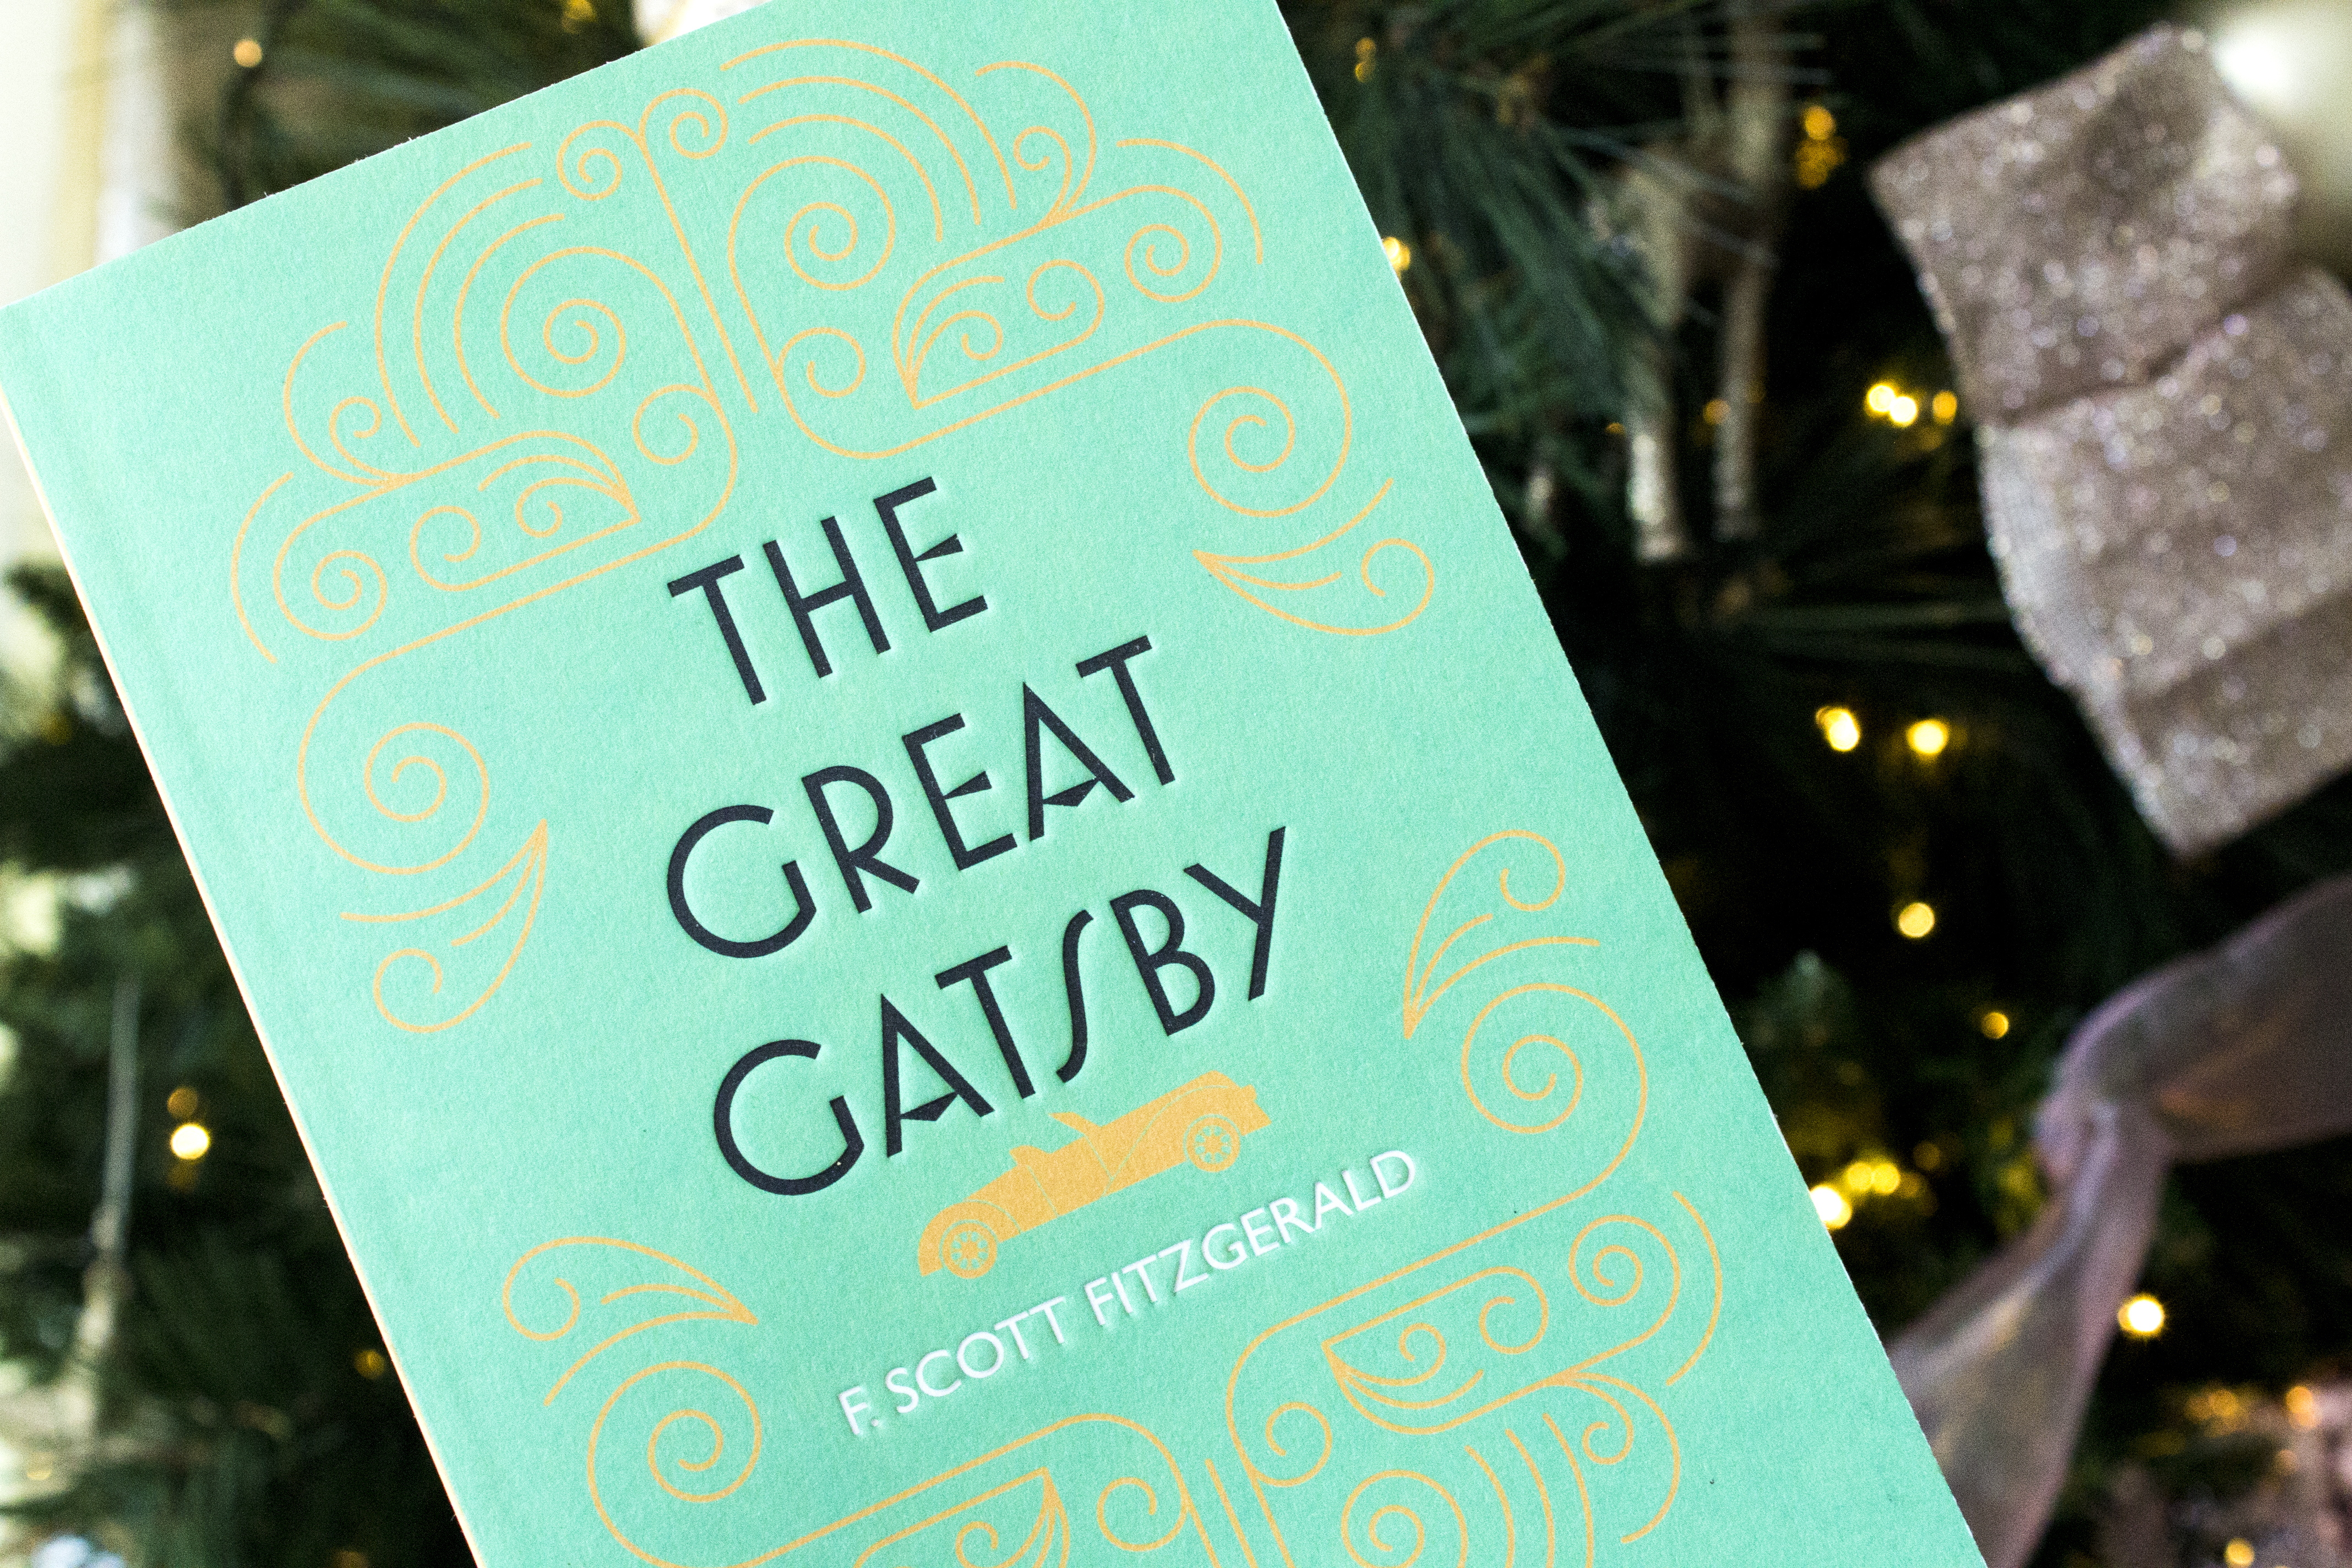 book the great gatsby